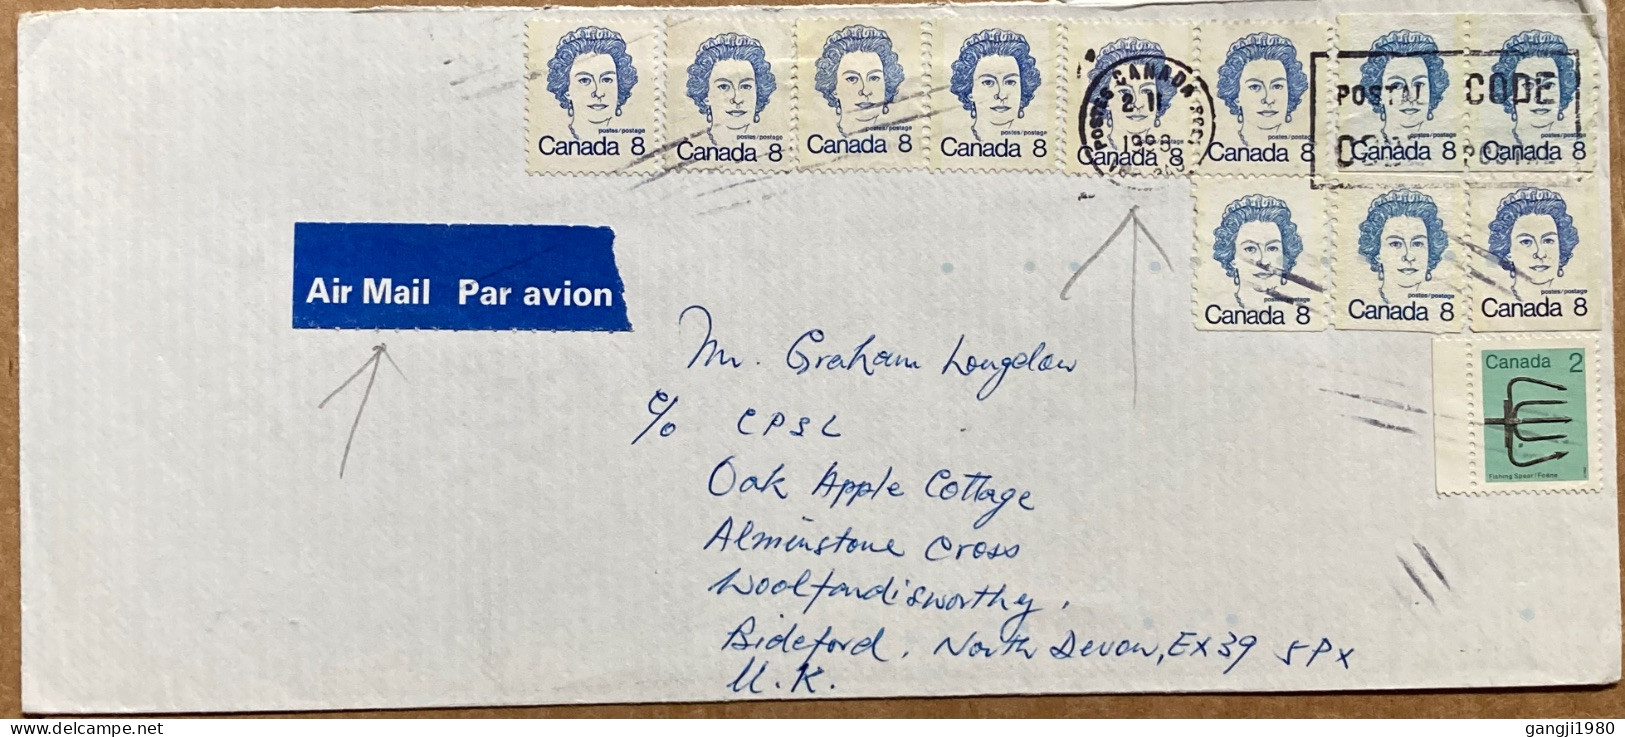 CANADA 1988, COVER USED TO ENGLAND, MULTI 12 STAMP, QUEEN & FISHING SPEAR, POST CODE, MACHINE SLOGAN CANCEL. - Briefe U. Dokumente